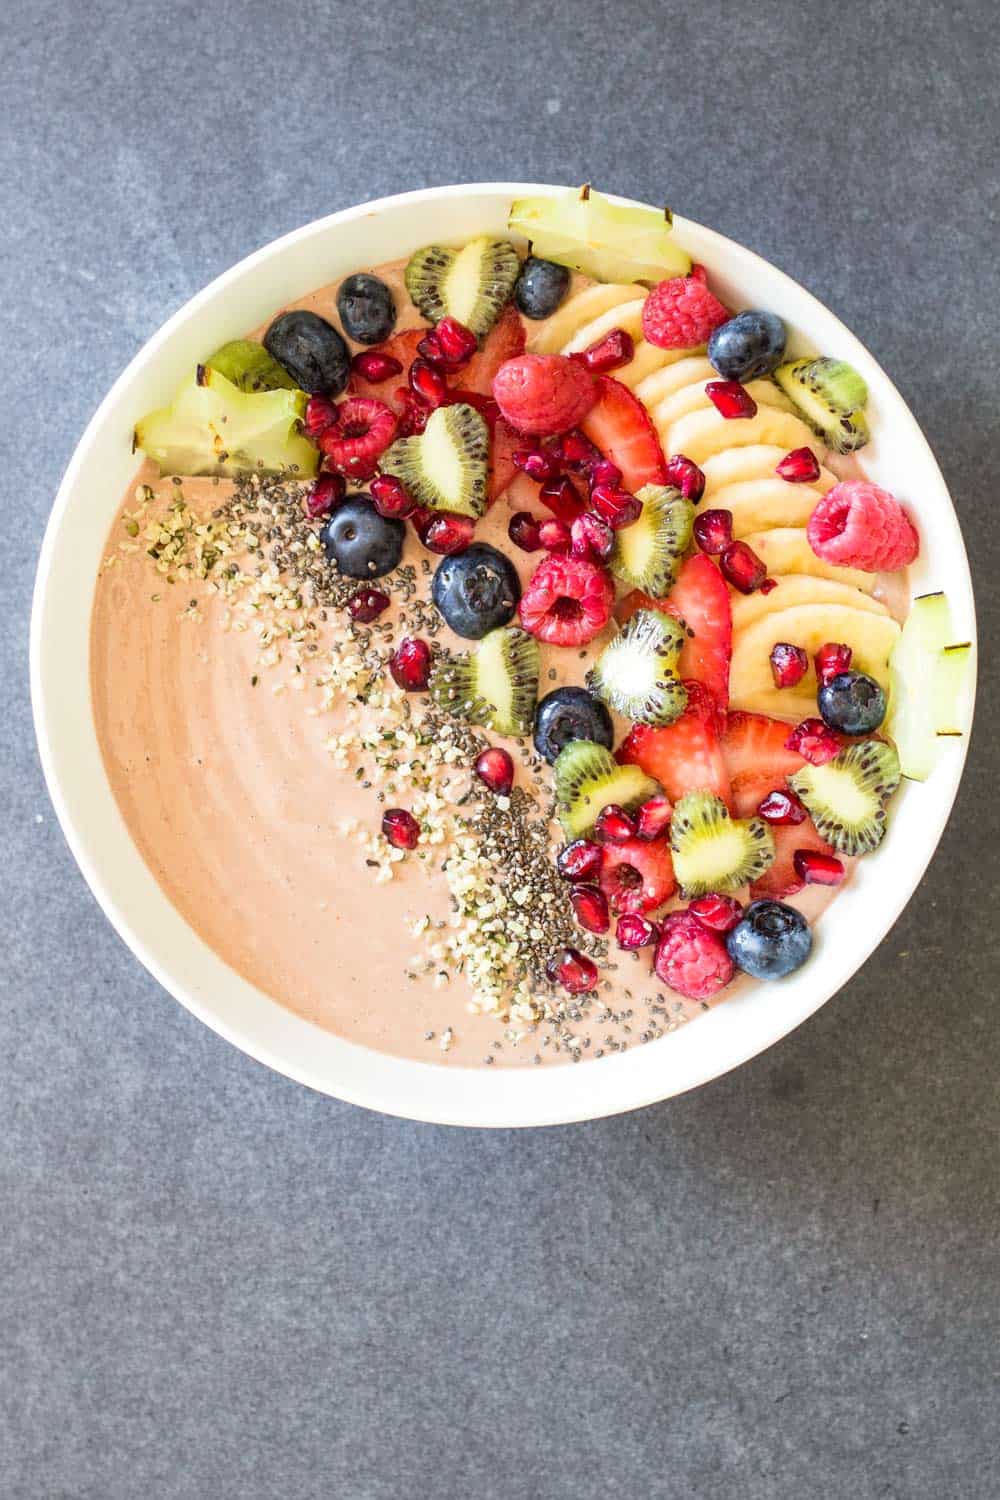 Top view of Chocolate Smoothie Bowl with chopped fresh fruit and seeds.